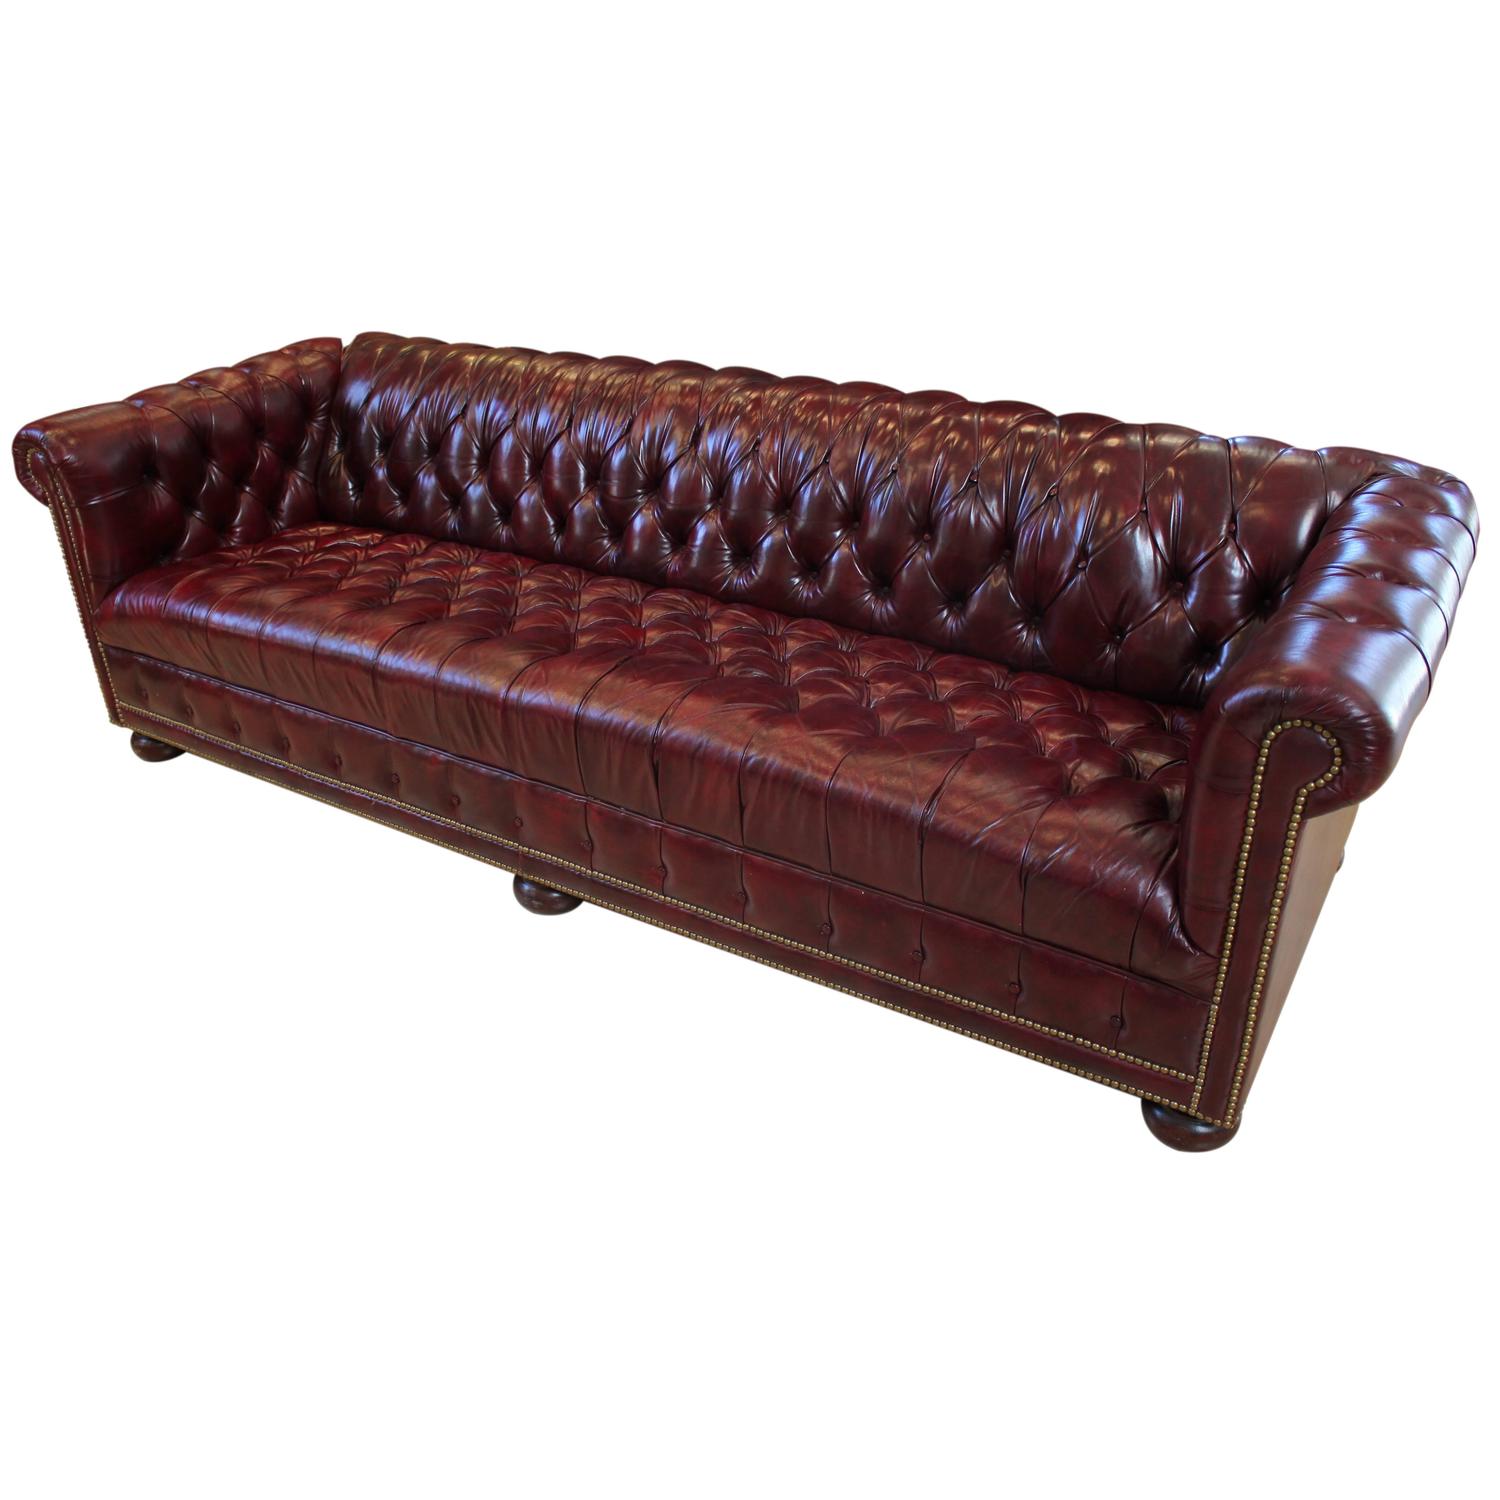 Vintage Tufted Leather 8 Chesterfield Sofa At 1stdibs